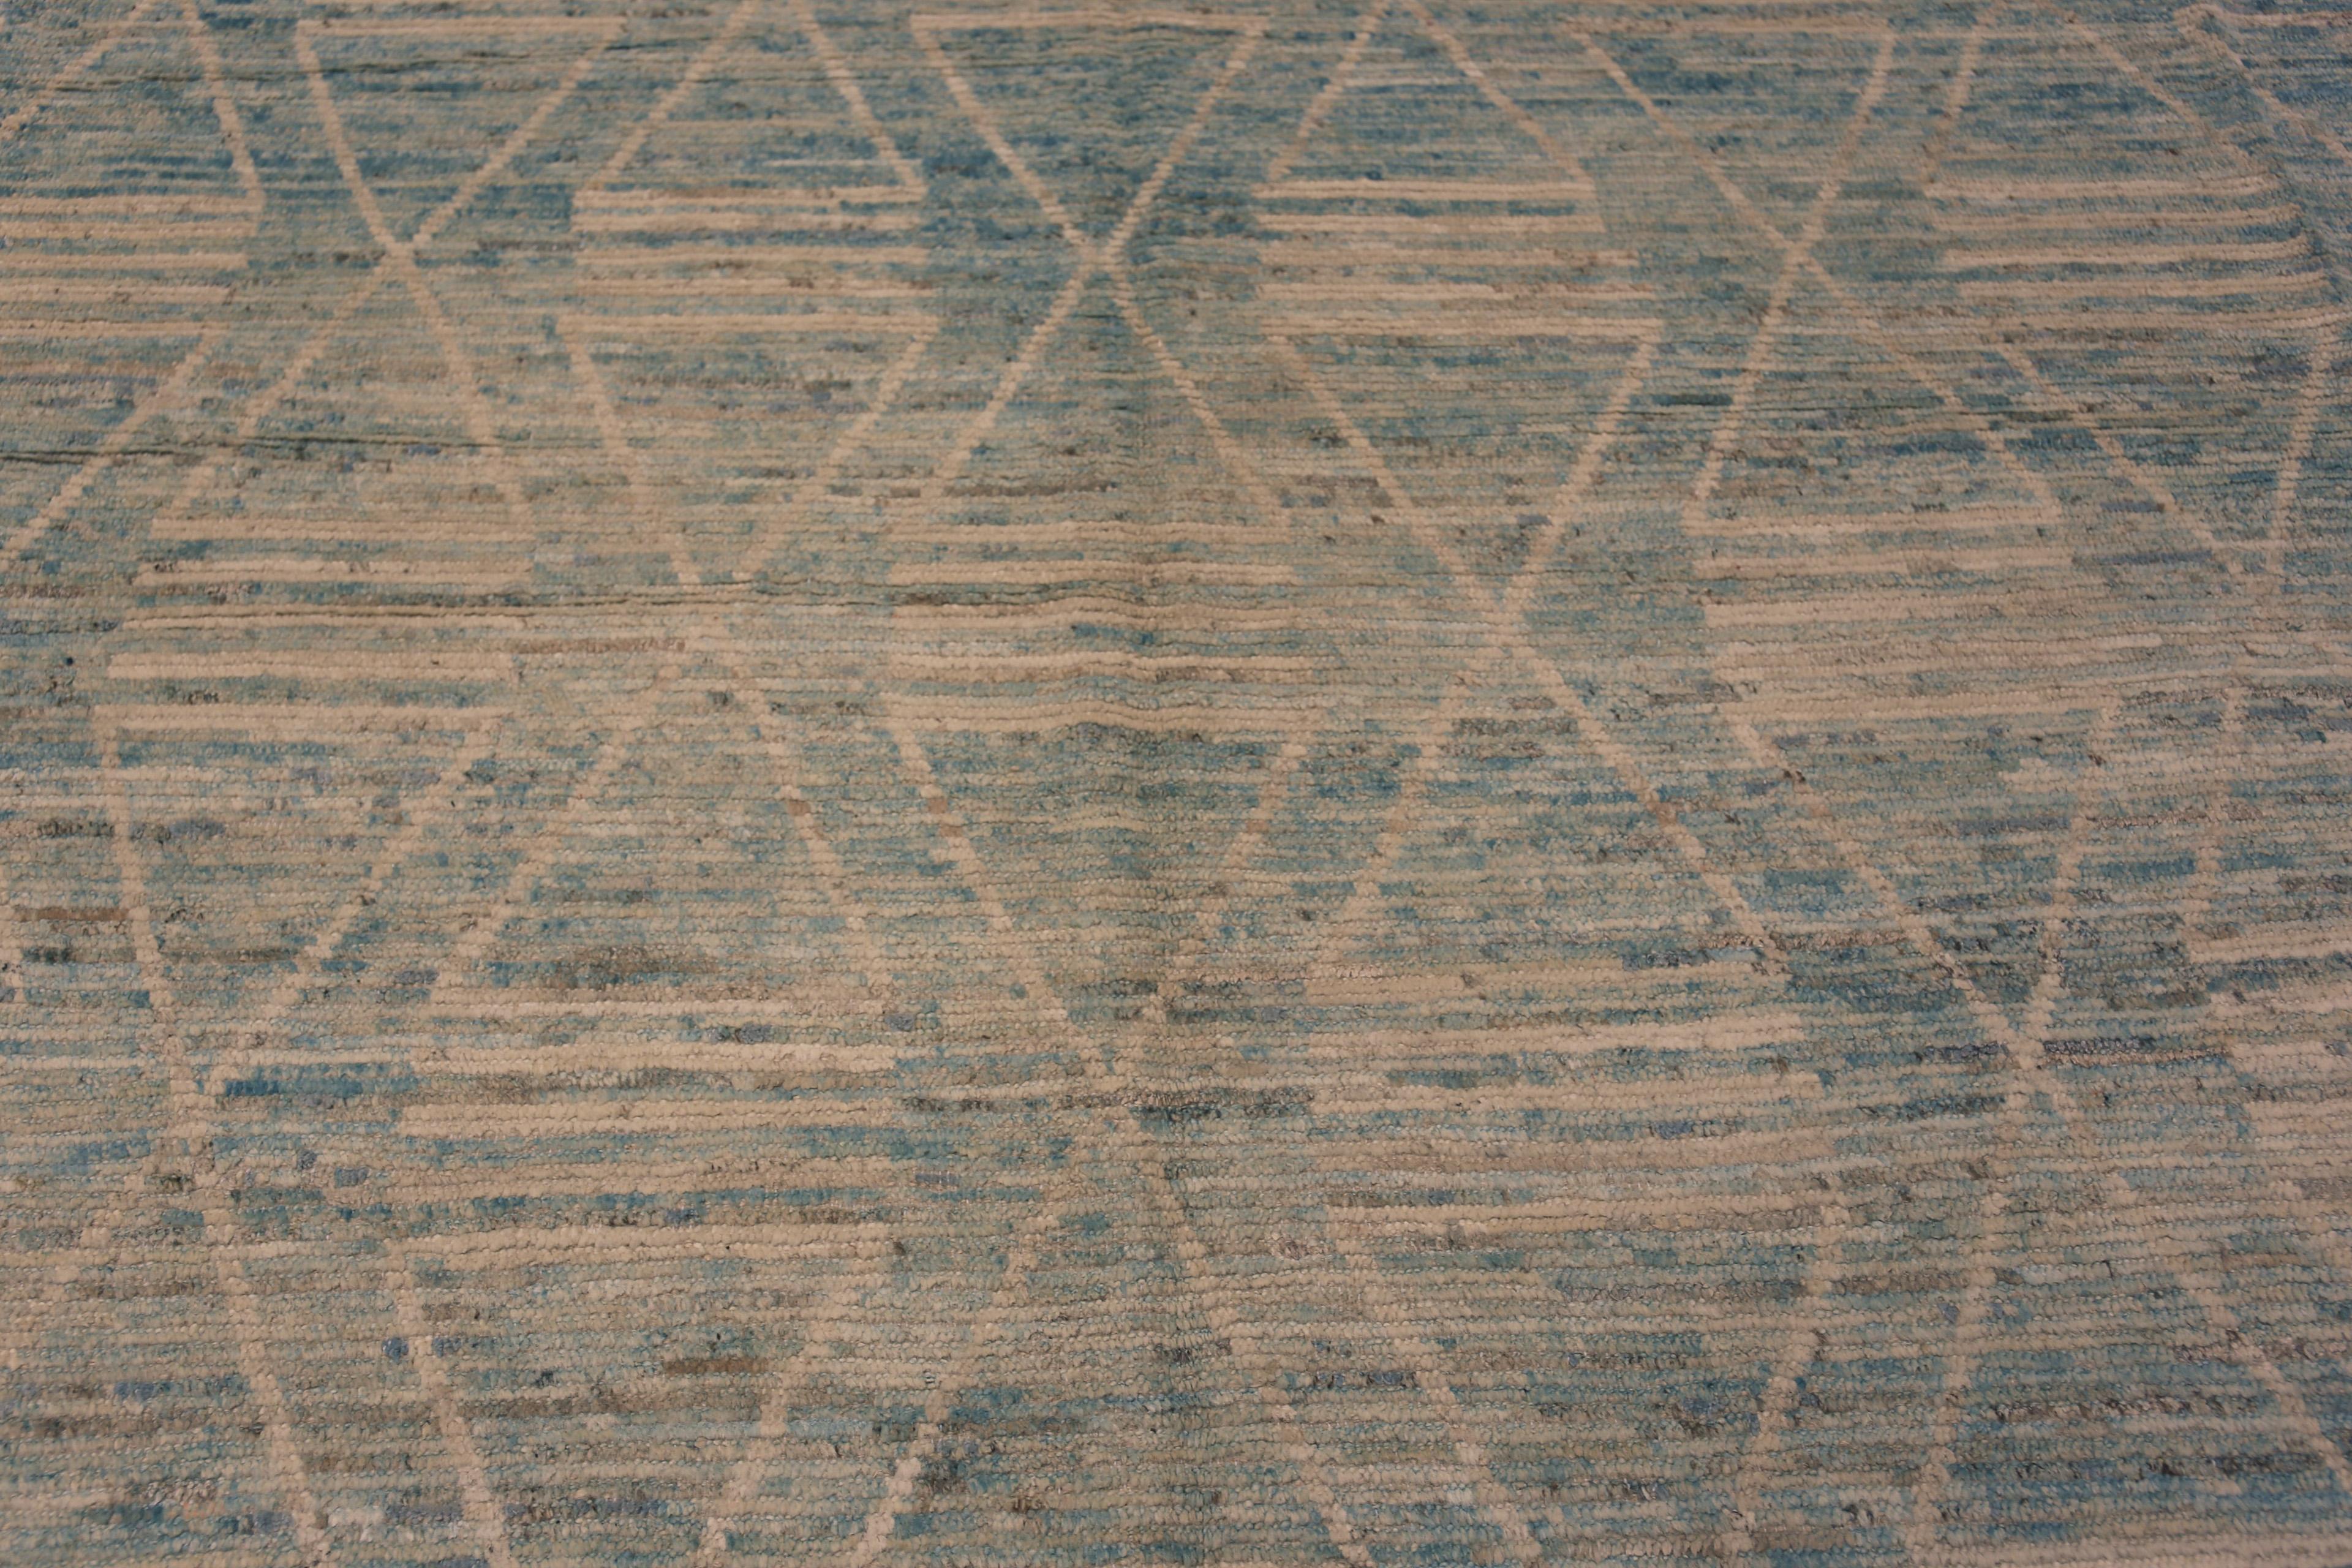 Gorgeous Large Washed Out Sky Blue Tribal Geometric Contemporary Modern Area Rug, Herkunftsland: Zentralasien, Entstehungszeit: Modern Rugs